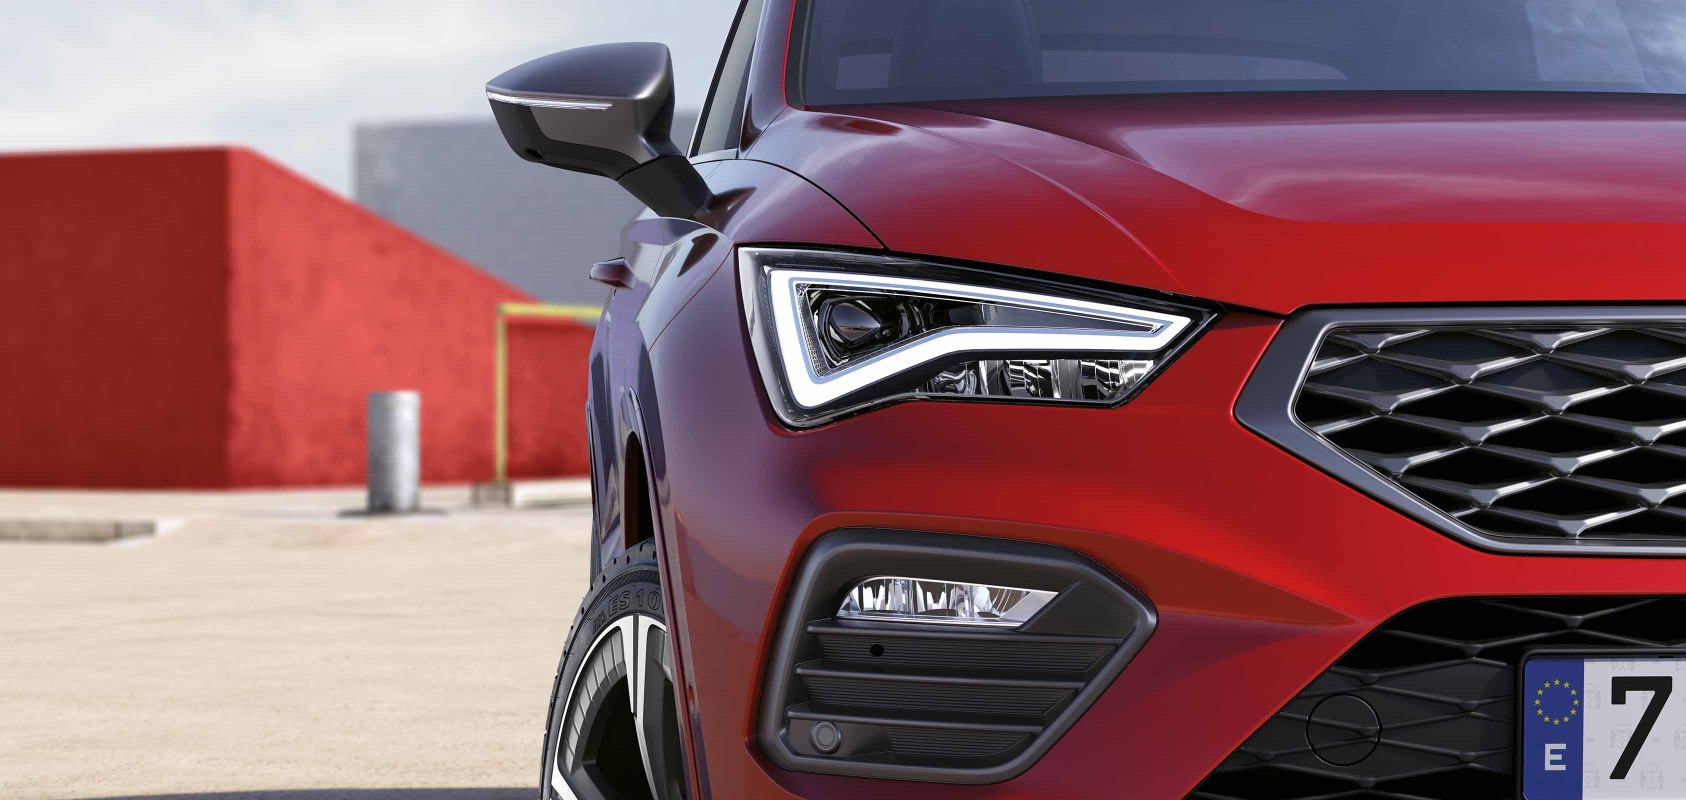 SEAT Ateca SUV exterior image close up view of front light